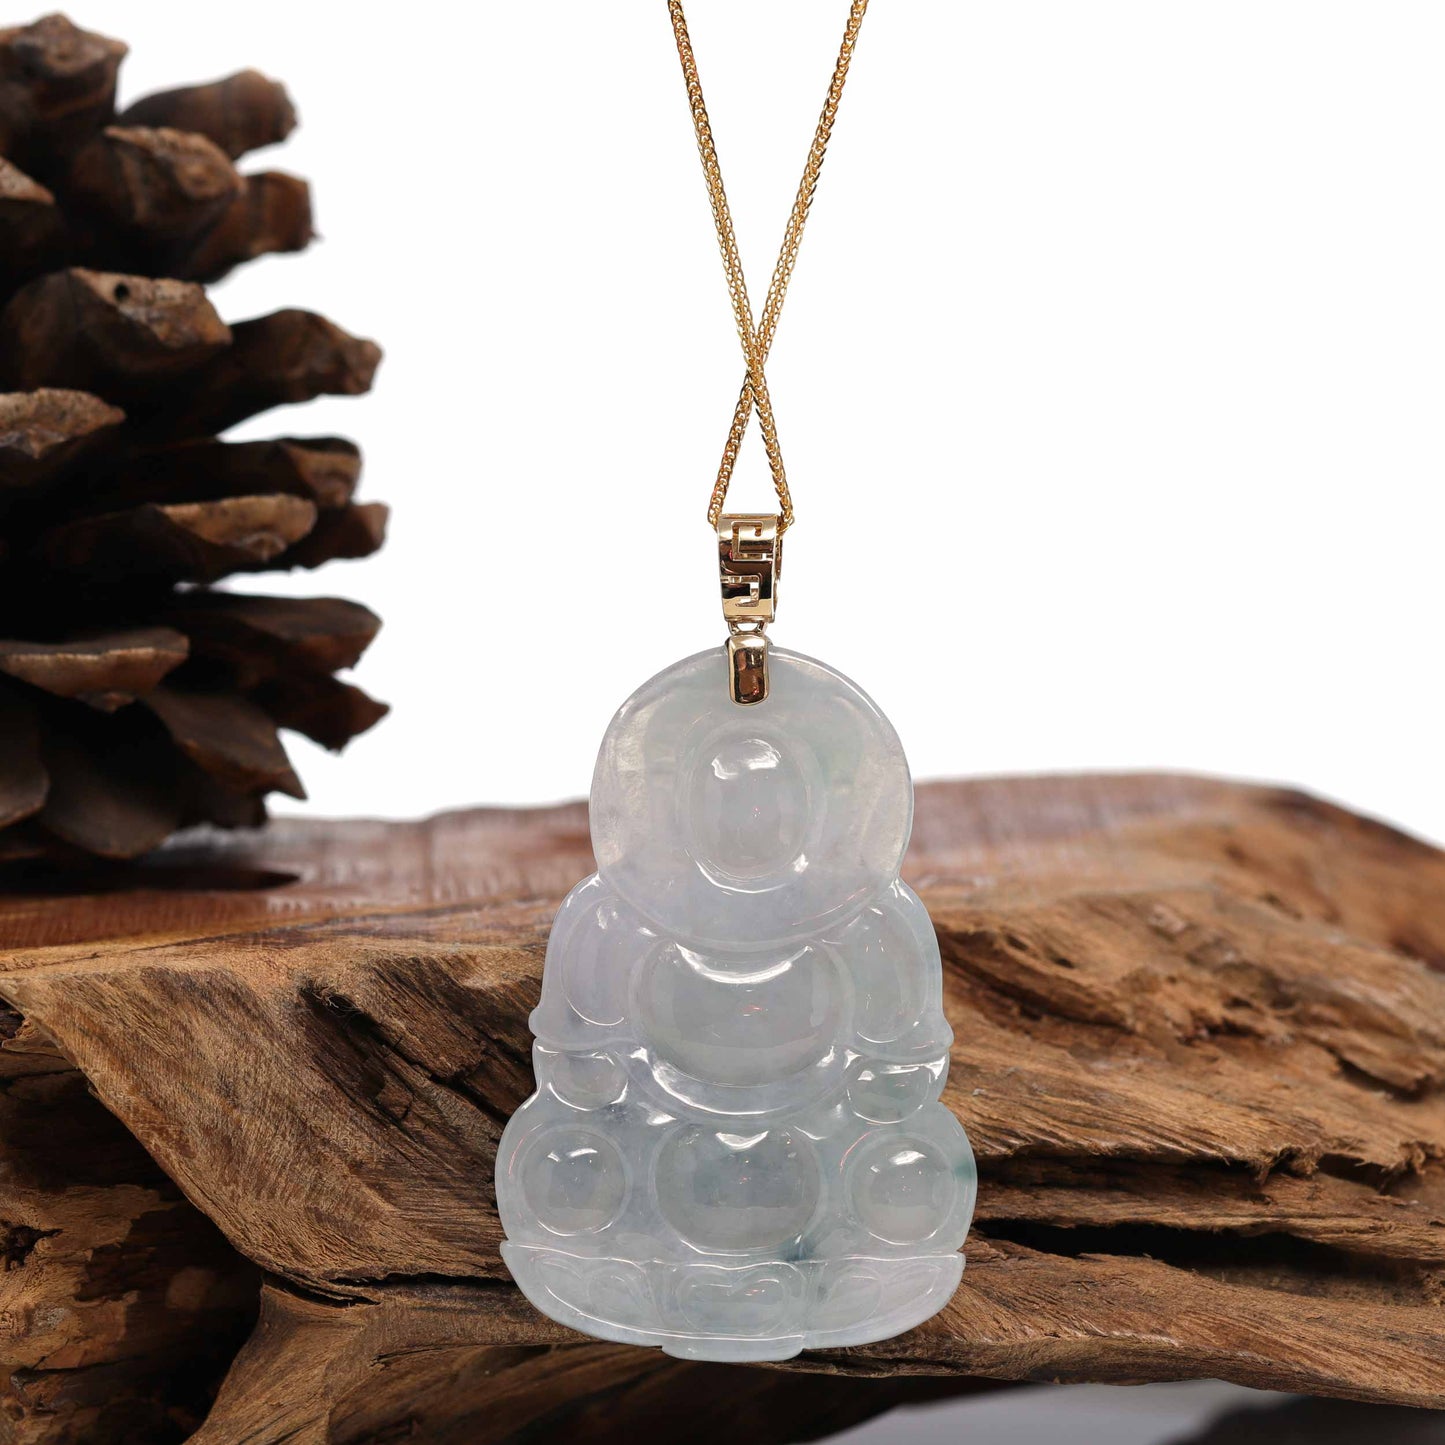 RealJade® 14k Yellow Gold "Goddess of Compassion" Genuine Burmese Jadeite Jade Guanyin Necklace With Good Luck Design